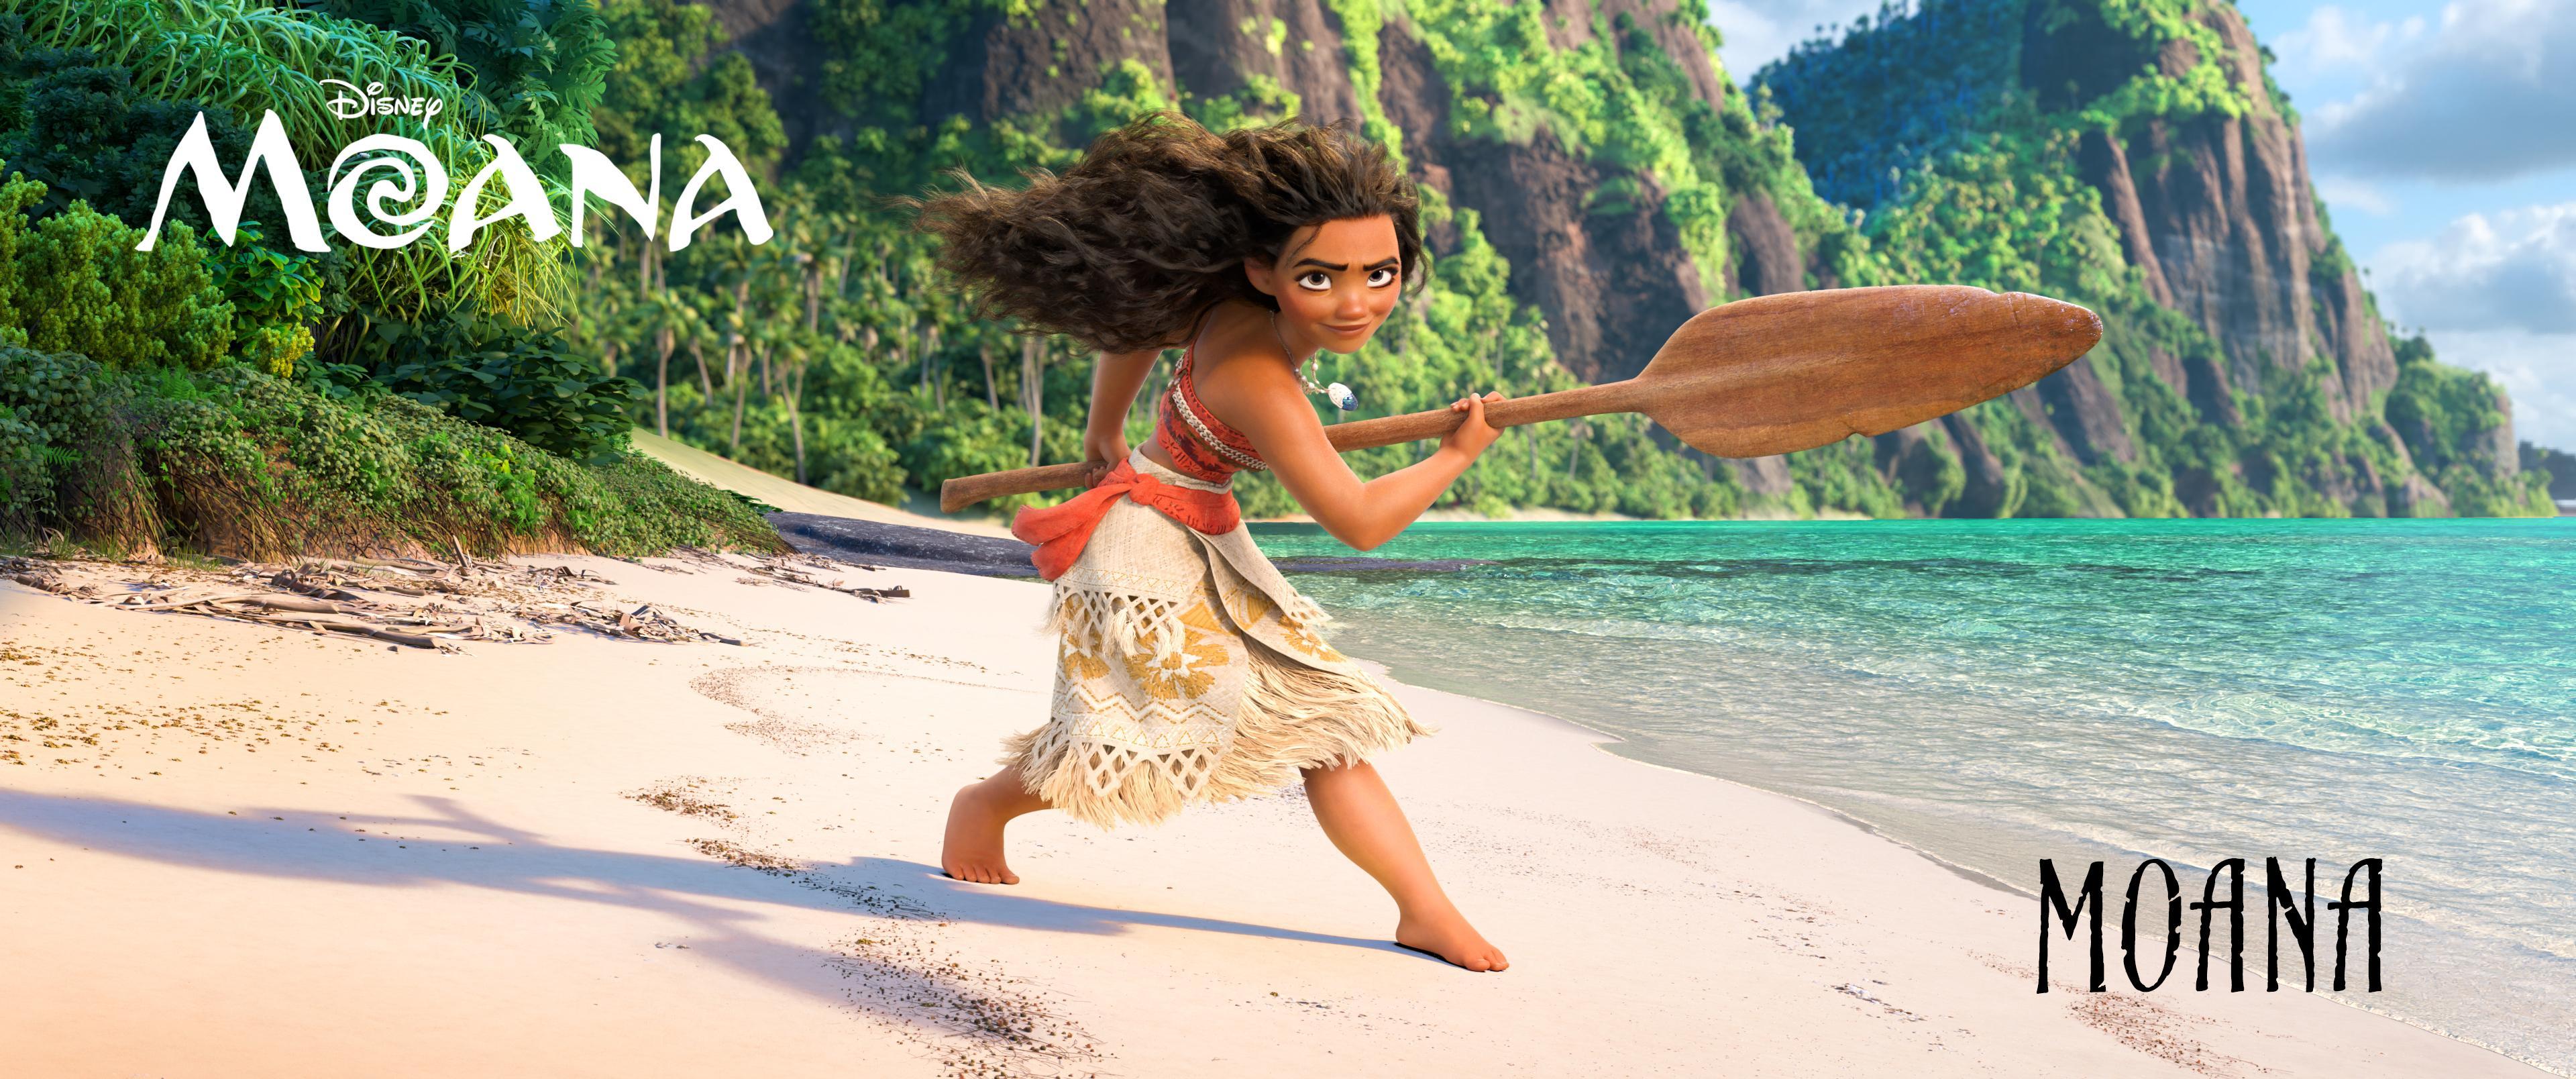 Disney's Moana Characters and Voice Cast Revealed